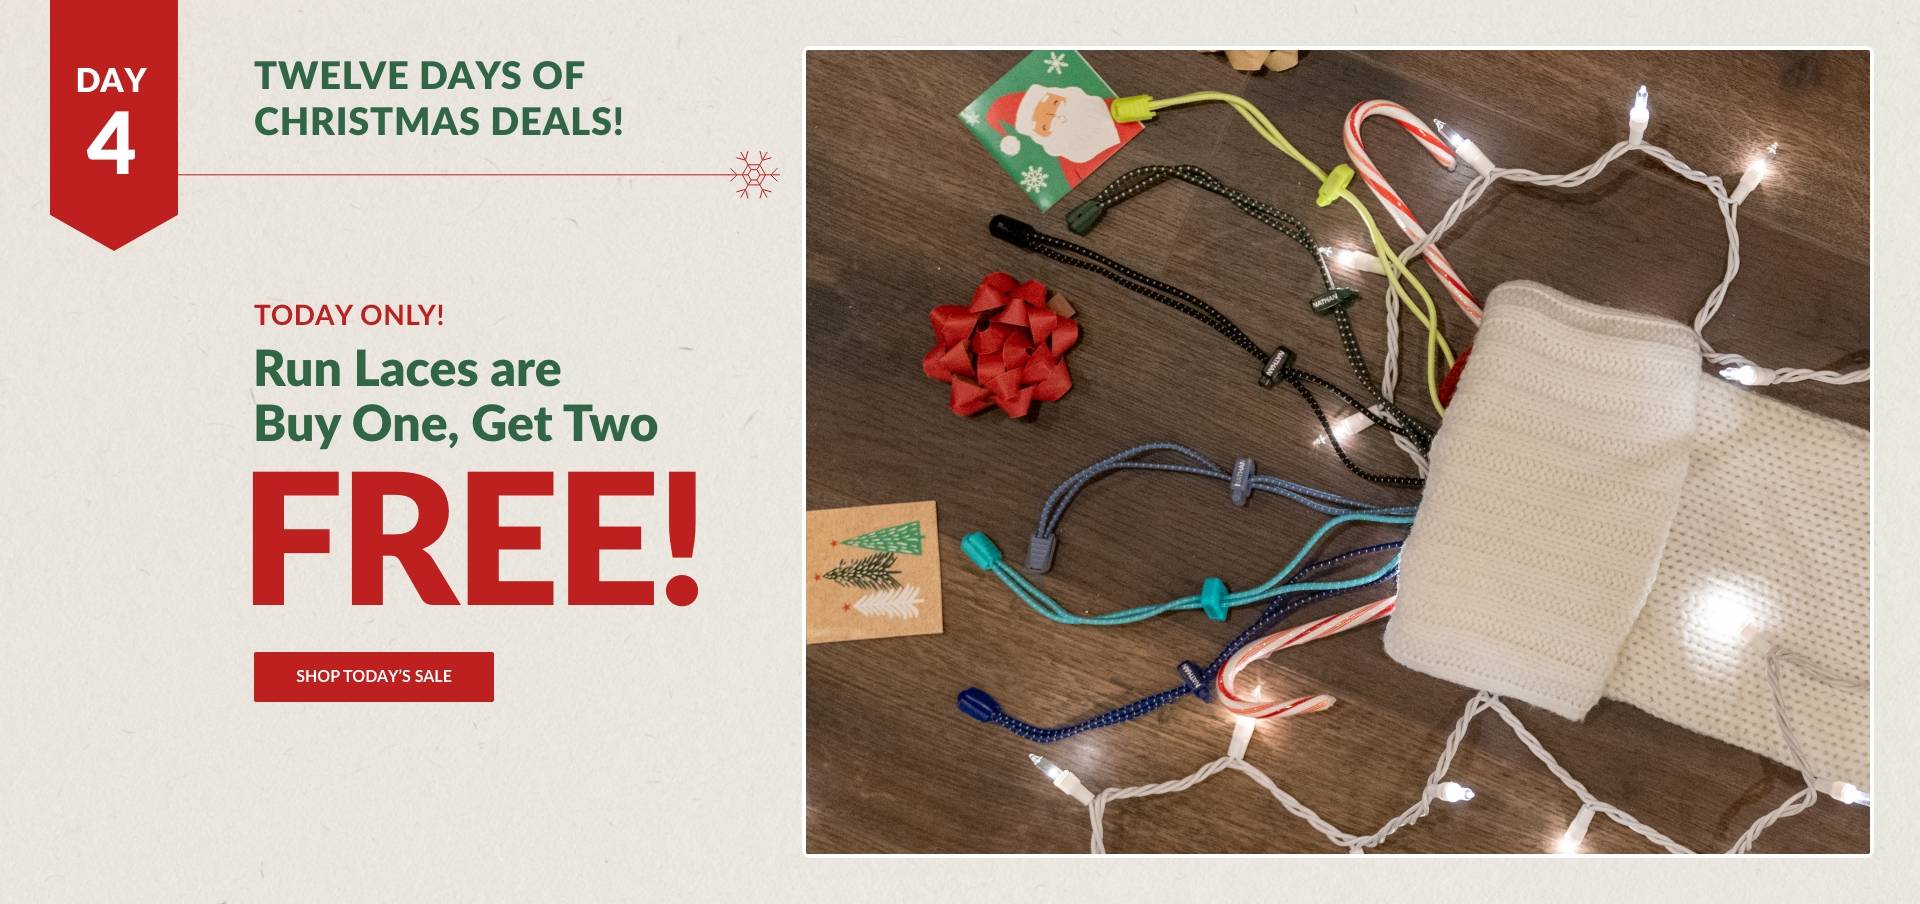 Today Only! Run Laces are Buy One, Get TWO Free - Shop Today's Sale